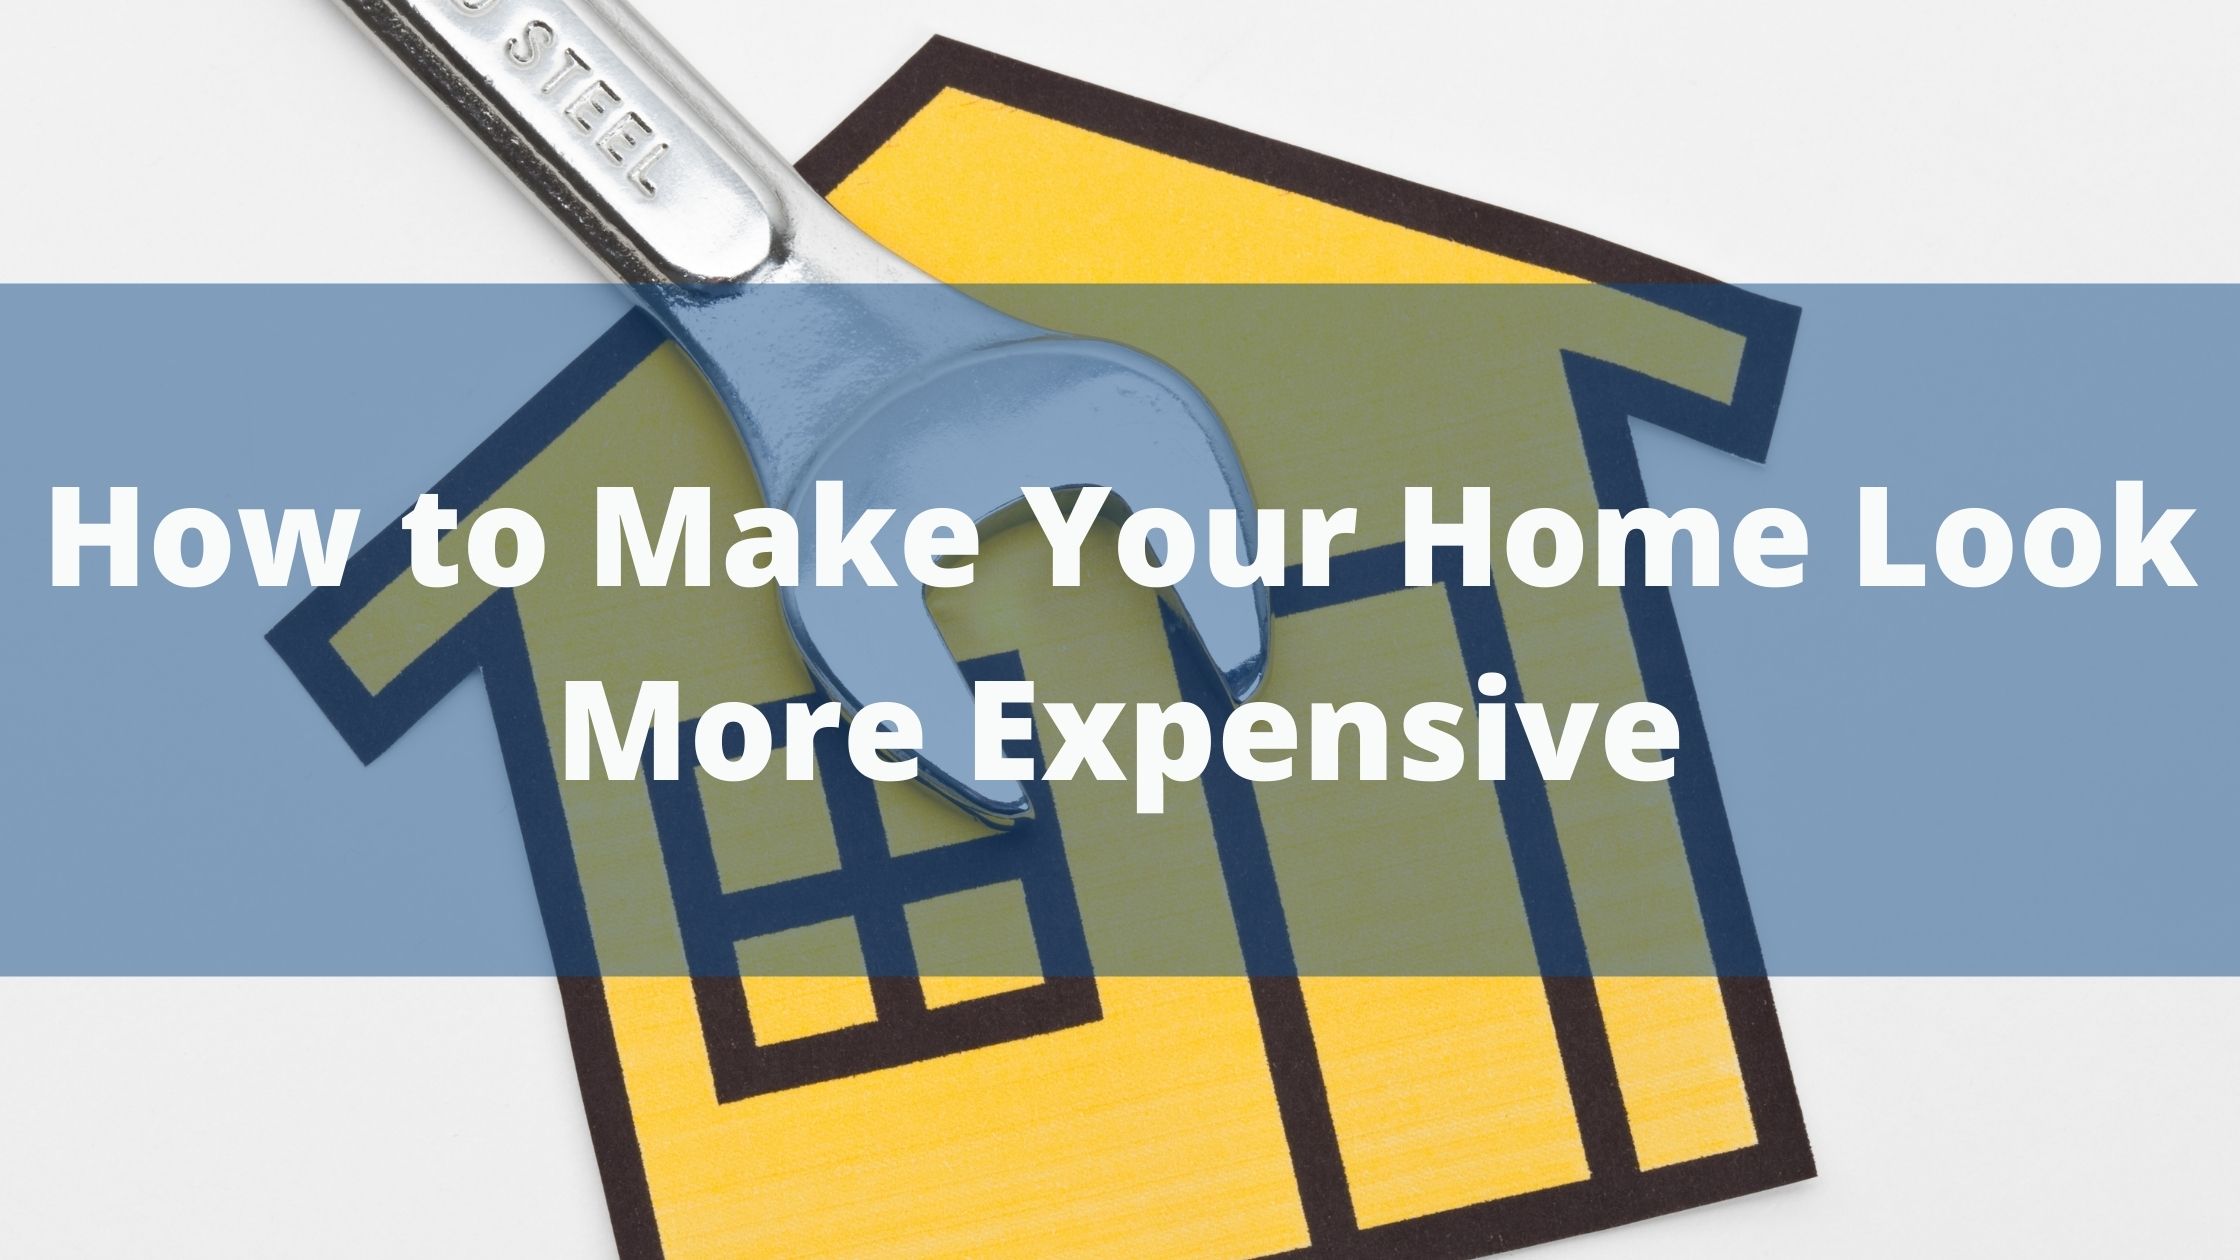 //www.explorizers.com/wp-content/uploads/2021/09/How-to-Make-Your-Home-Look-More-Expensive.jpg